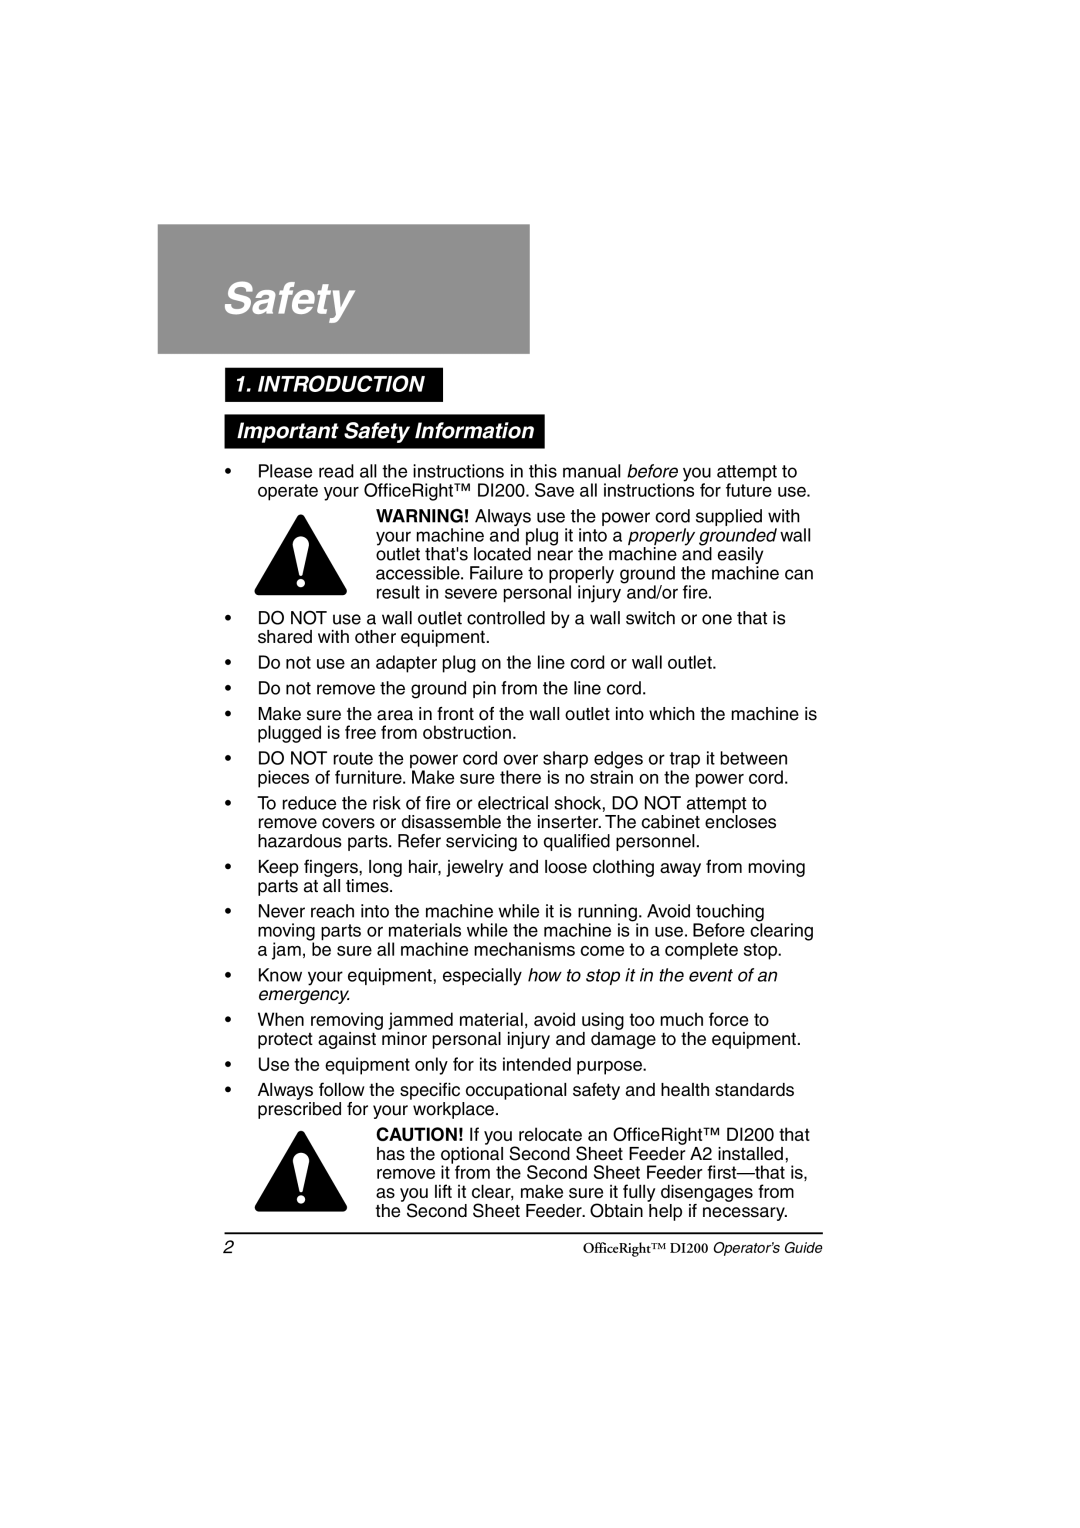 Pitney Bowes DI200 manual Important Safety Information 